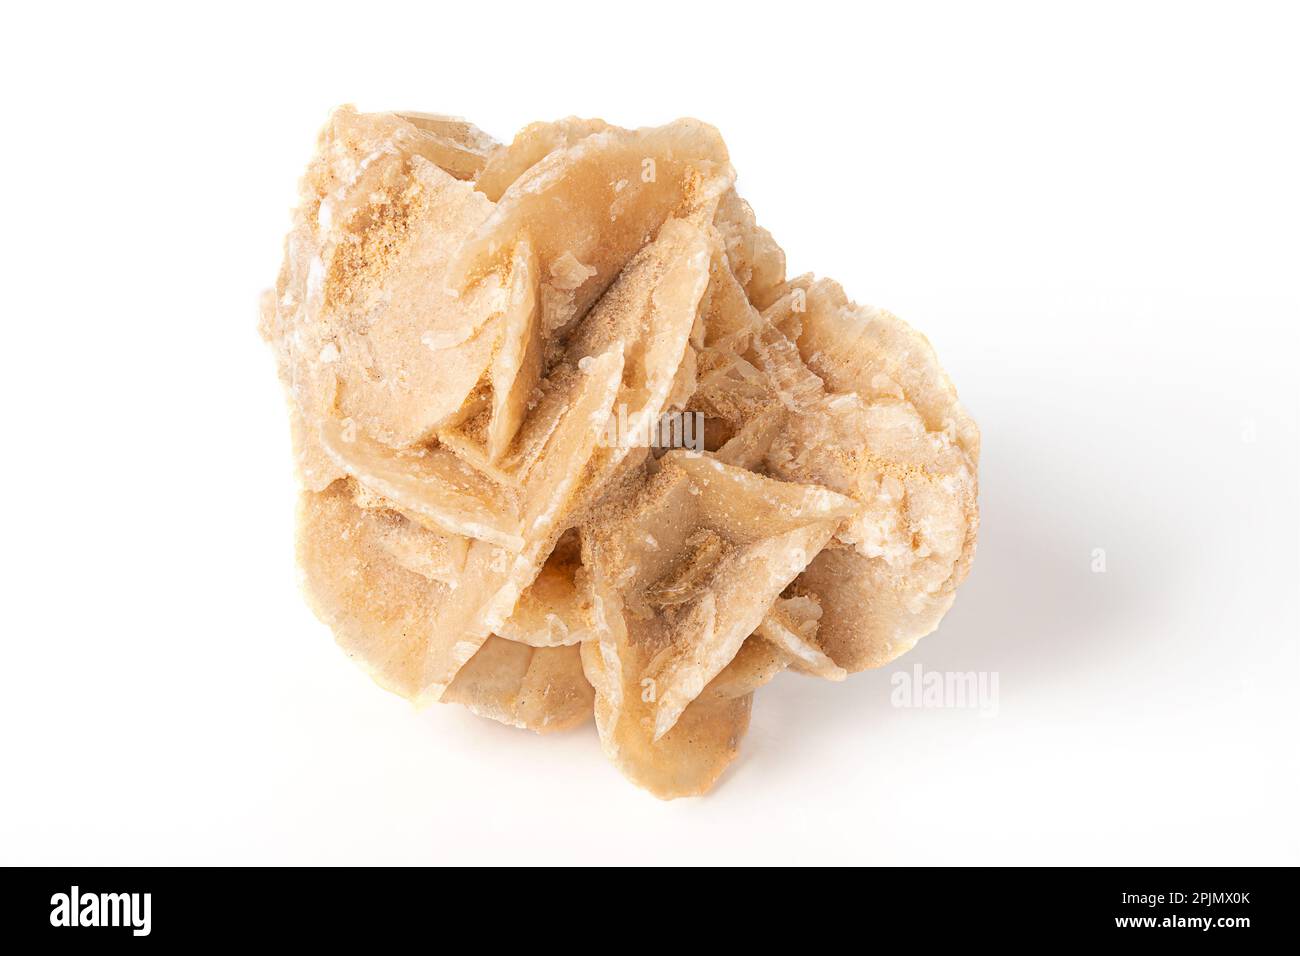 Desert rose, crystal cluster from Tunisia, front view. Also known as rose rock, Sahara, selenite, gypsum and barite rose. Rose-like formation. Stock Photo